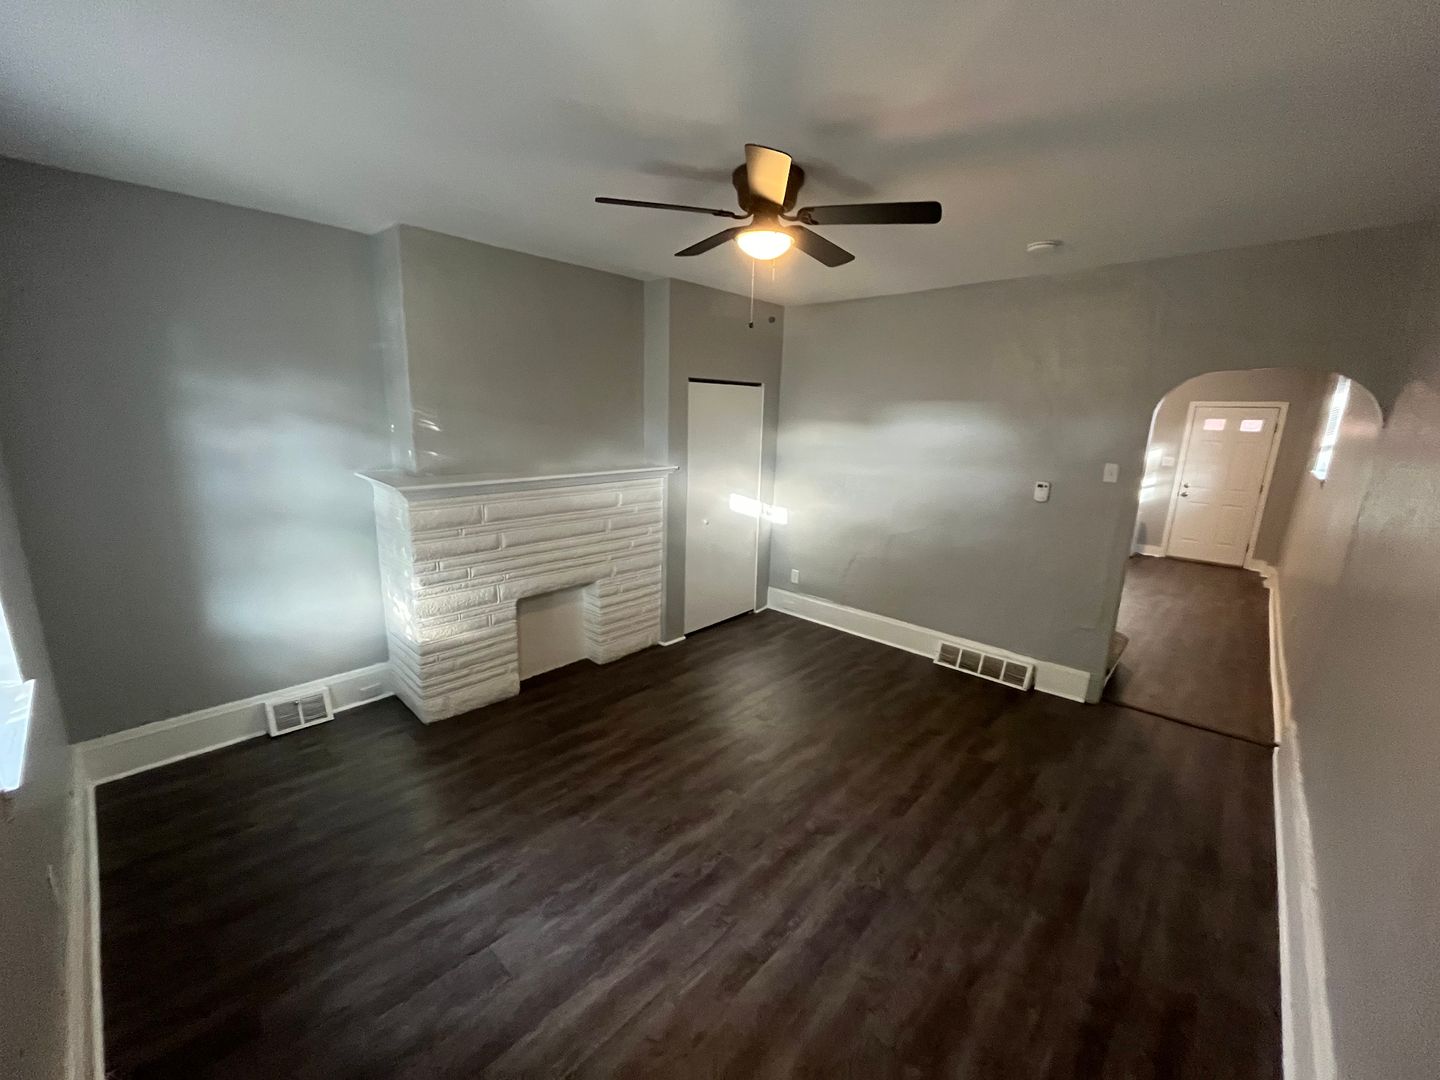 Brand New Remodel - 2BD/ 1BA Home in South Side Flats